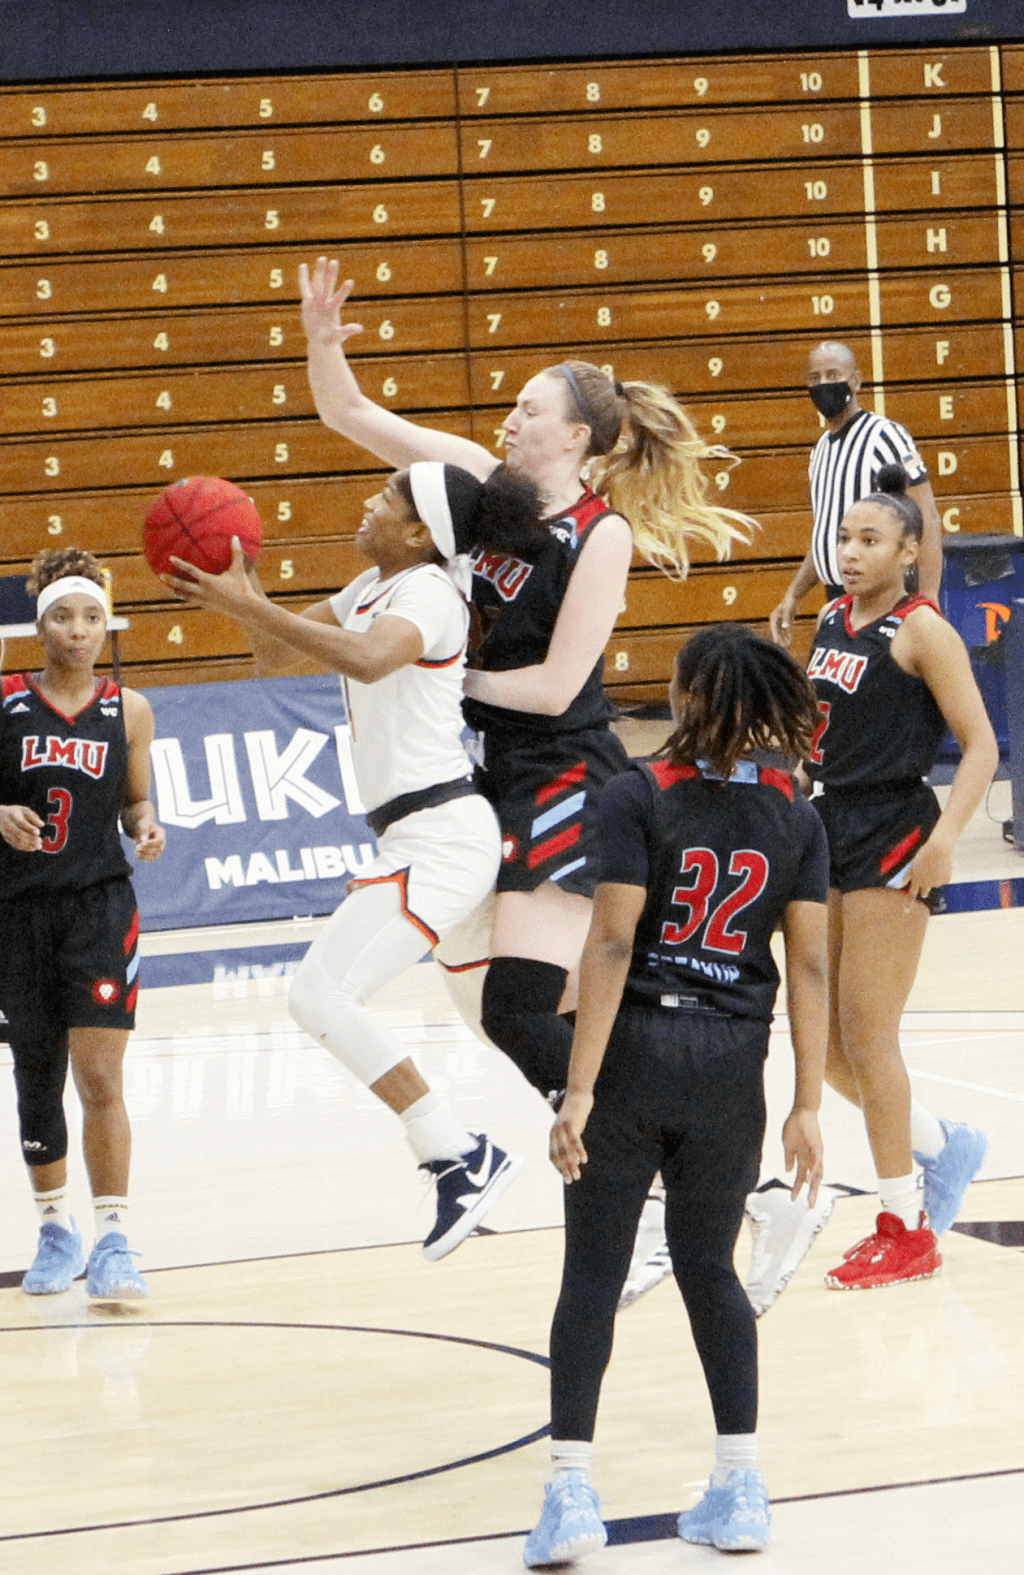 Junior guard Cheyenne Givens drives the lane against LMU's Megan Mandel during Saturday's win. The Waves survived a second half Lions comeback to notch their first WCC win of the season.